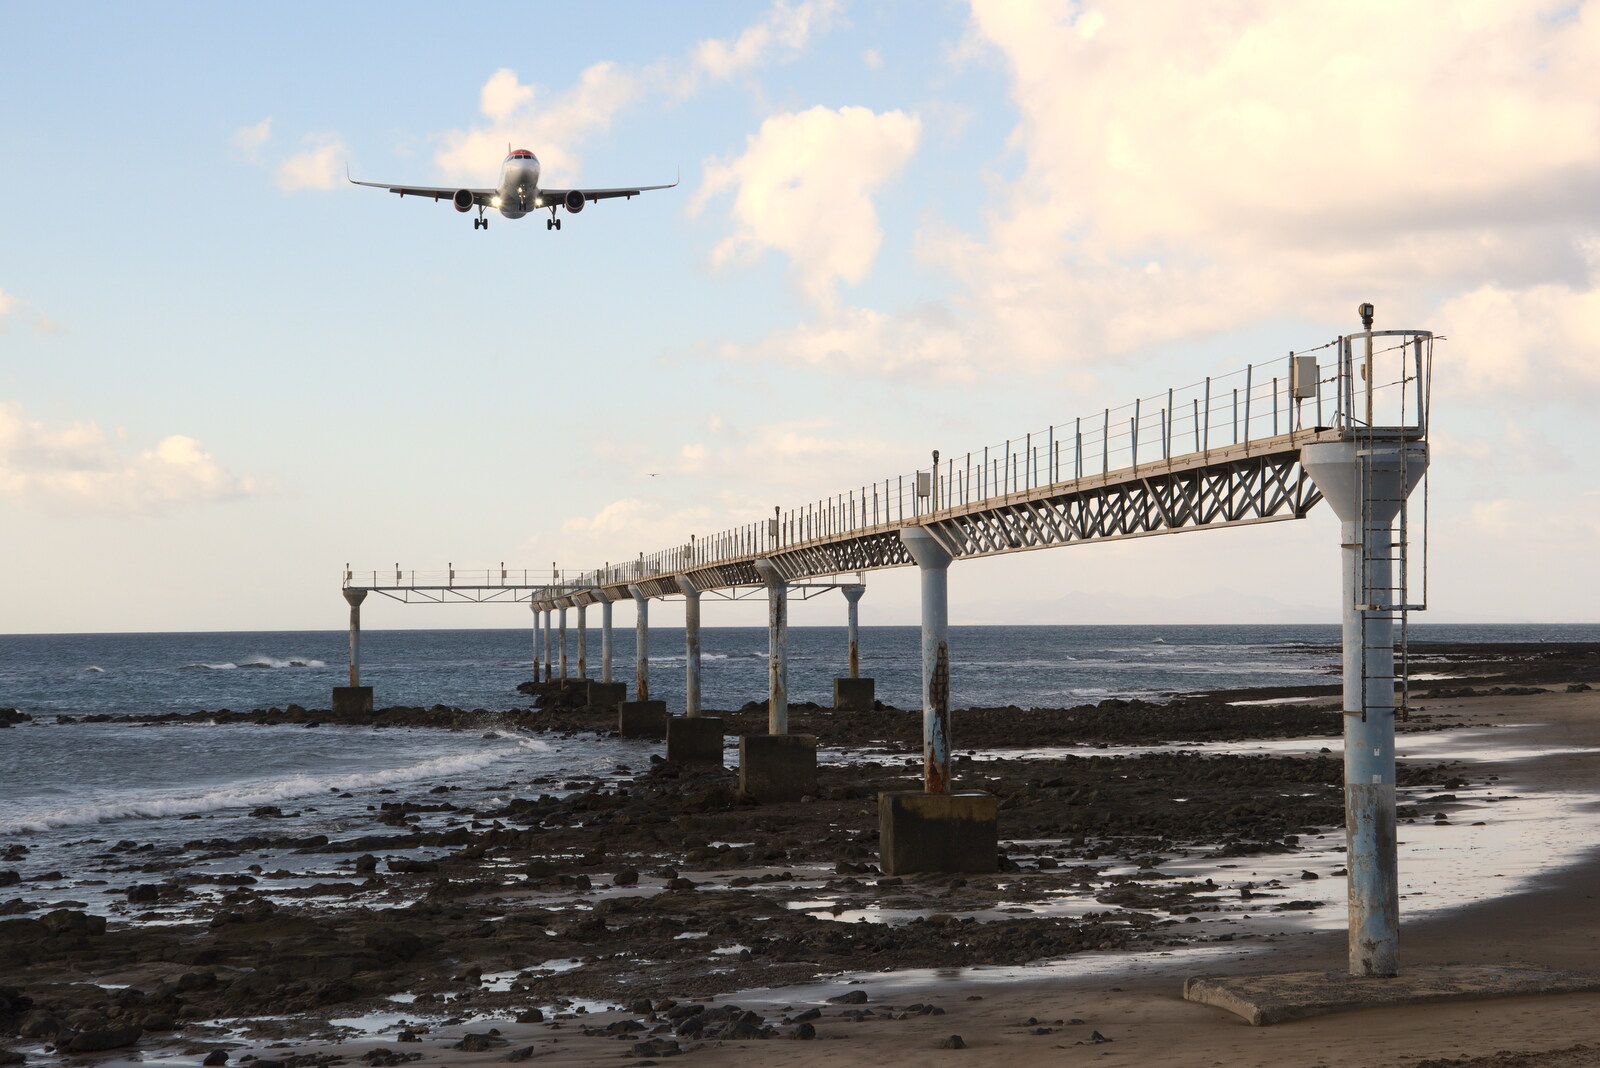 The pre-runway lights are actually in the sea from Five Days in Lanzarote, Canary Islands, Spain - 24th October 2021